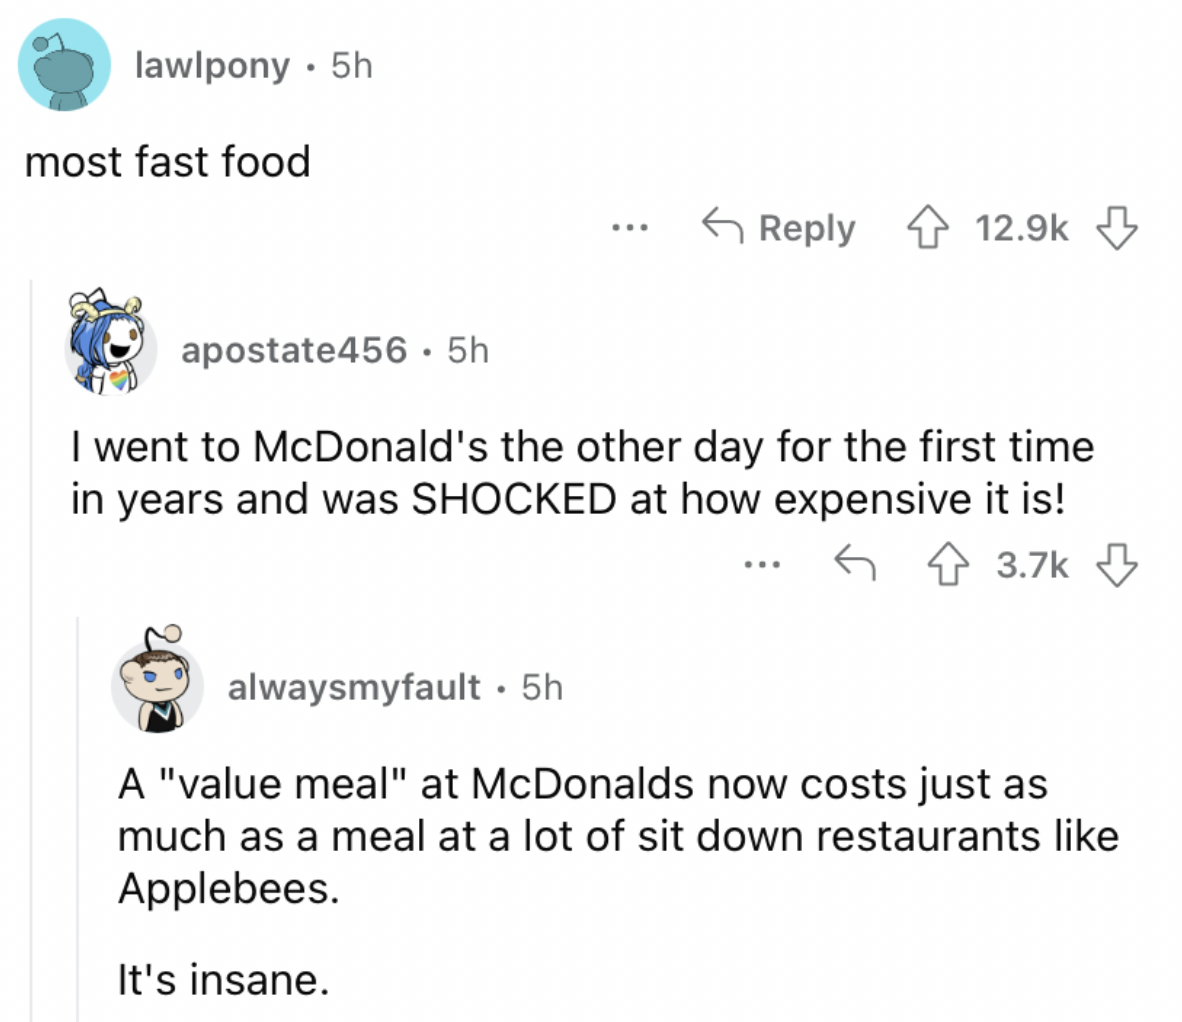 Reddit screenshot about how McDonald's is super expensive nowadays